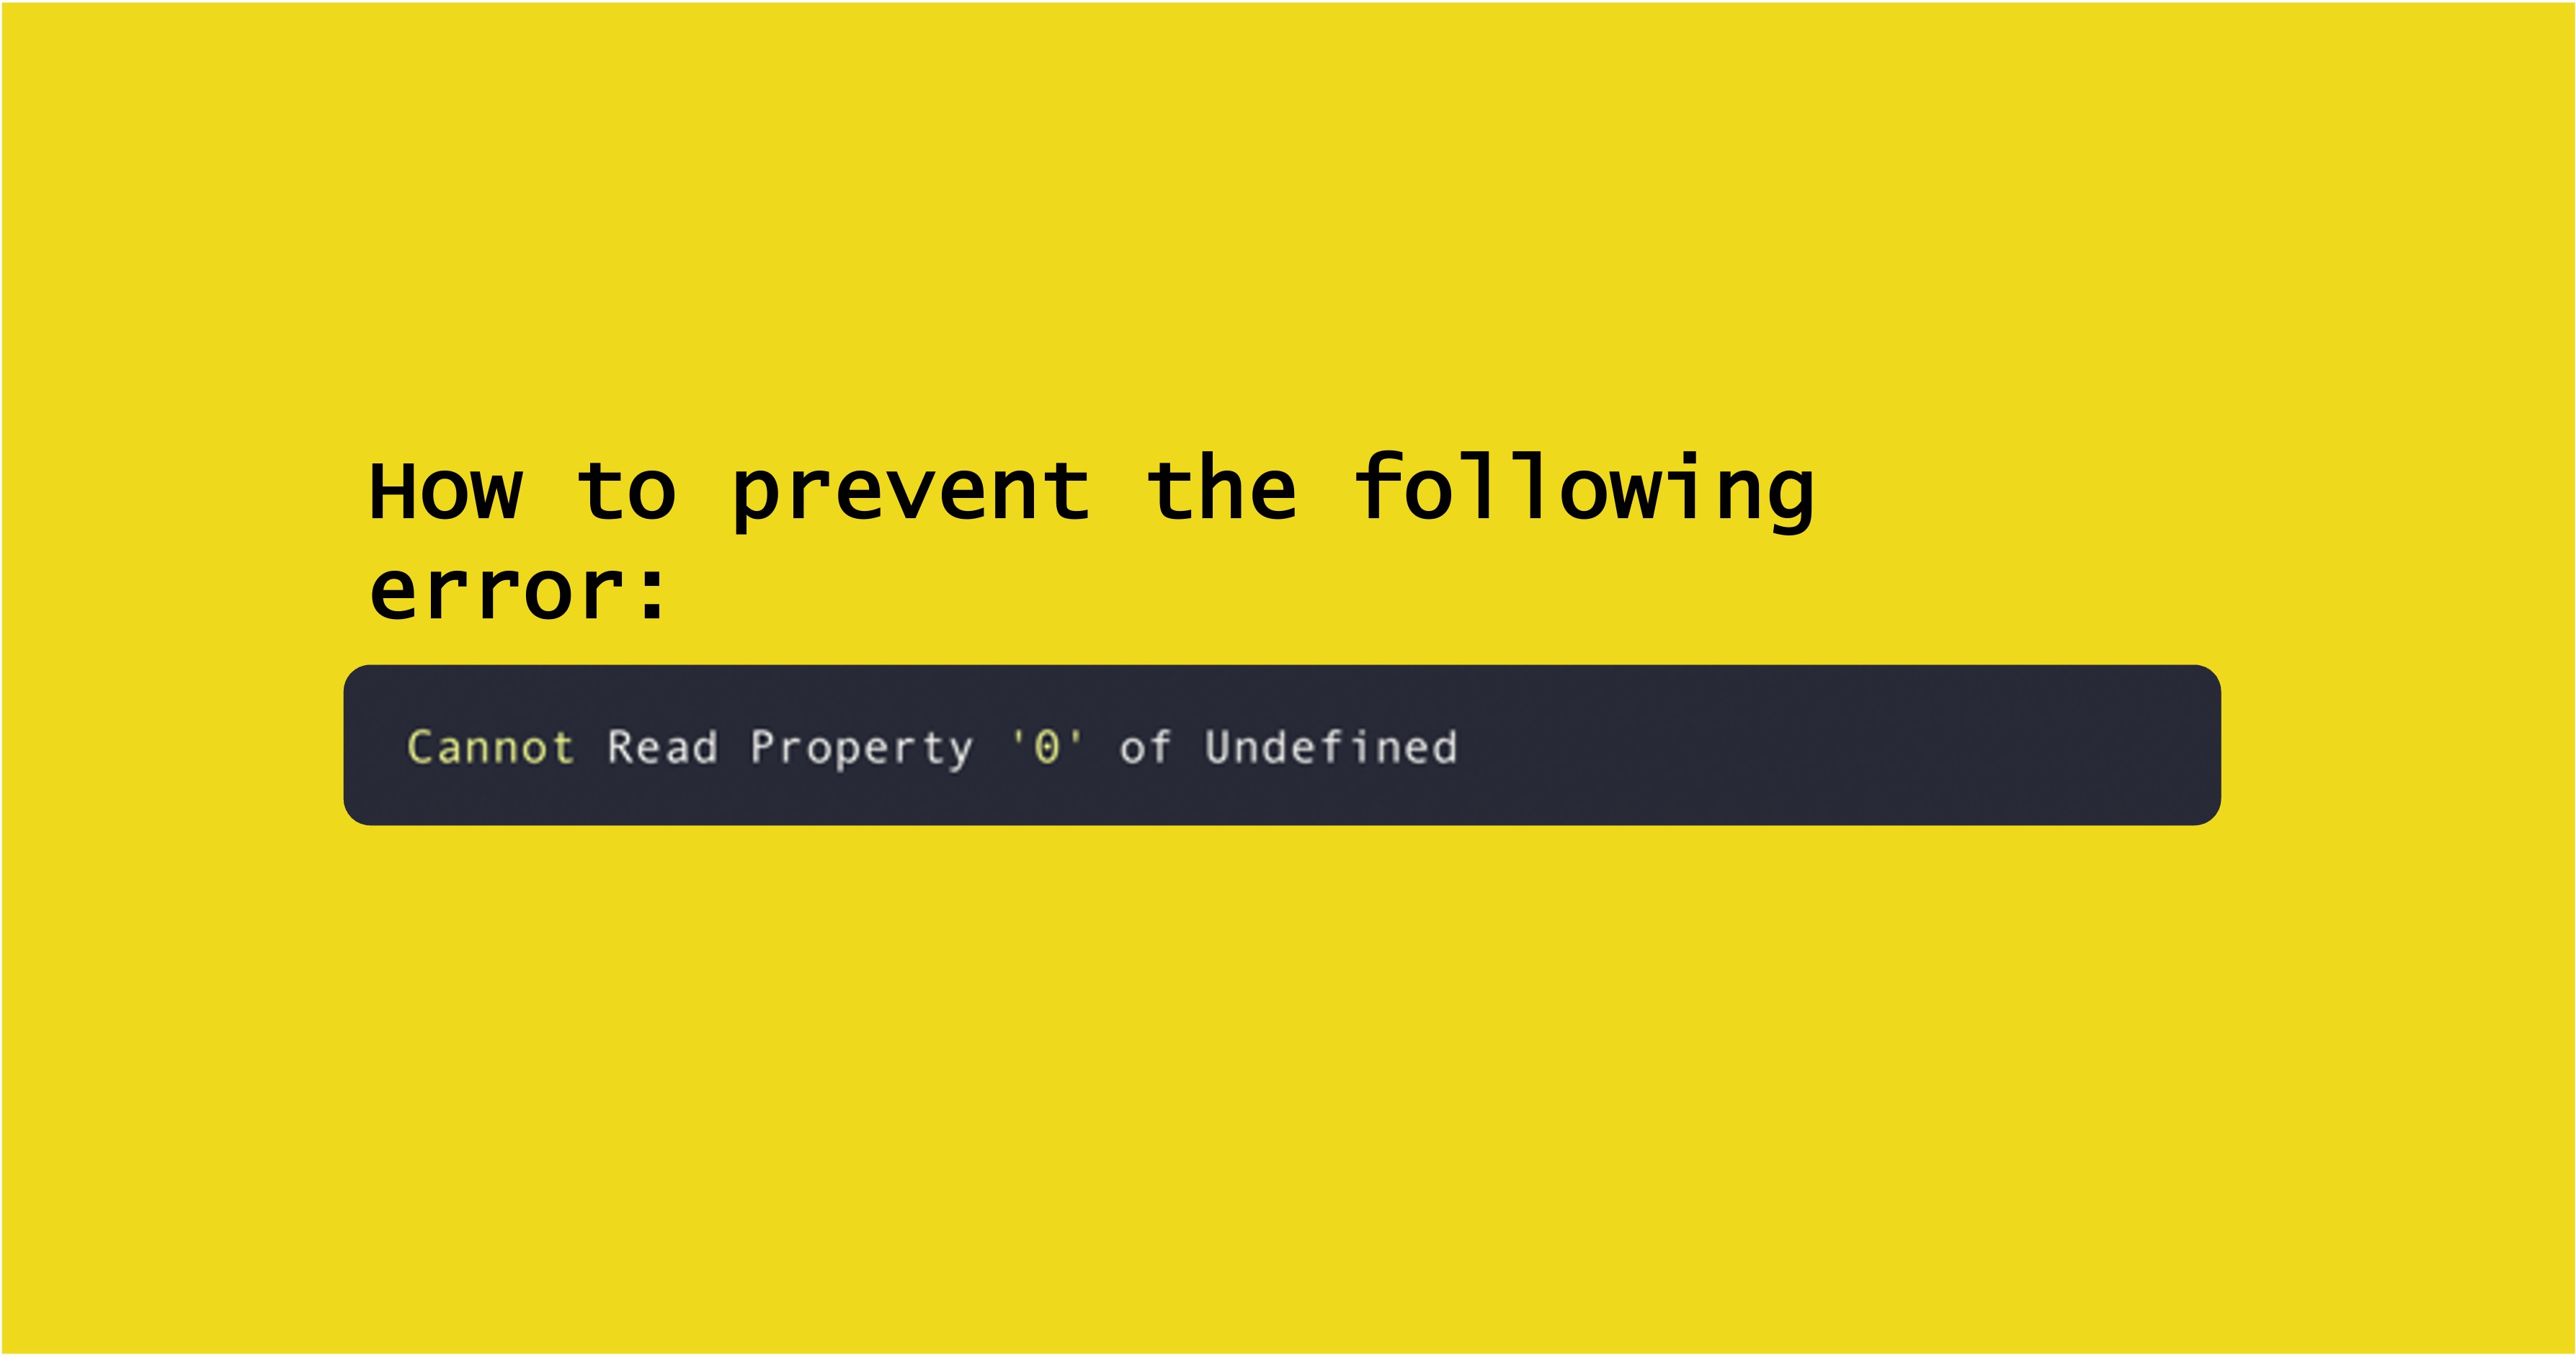 Text on a yellow background saying "how to prevent the following error: cannot read property '0' of undefined"